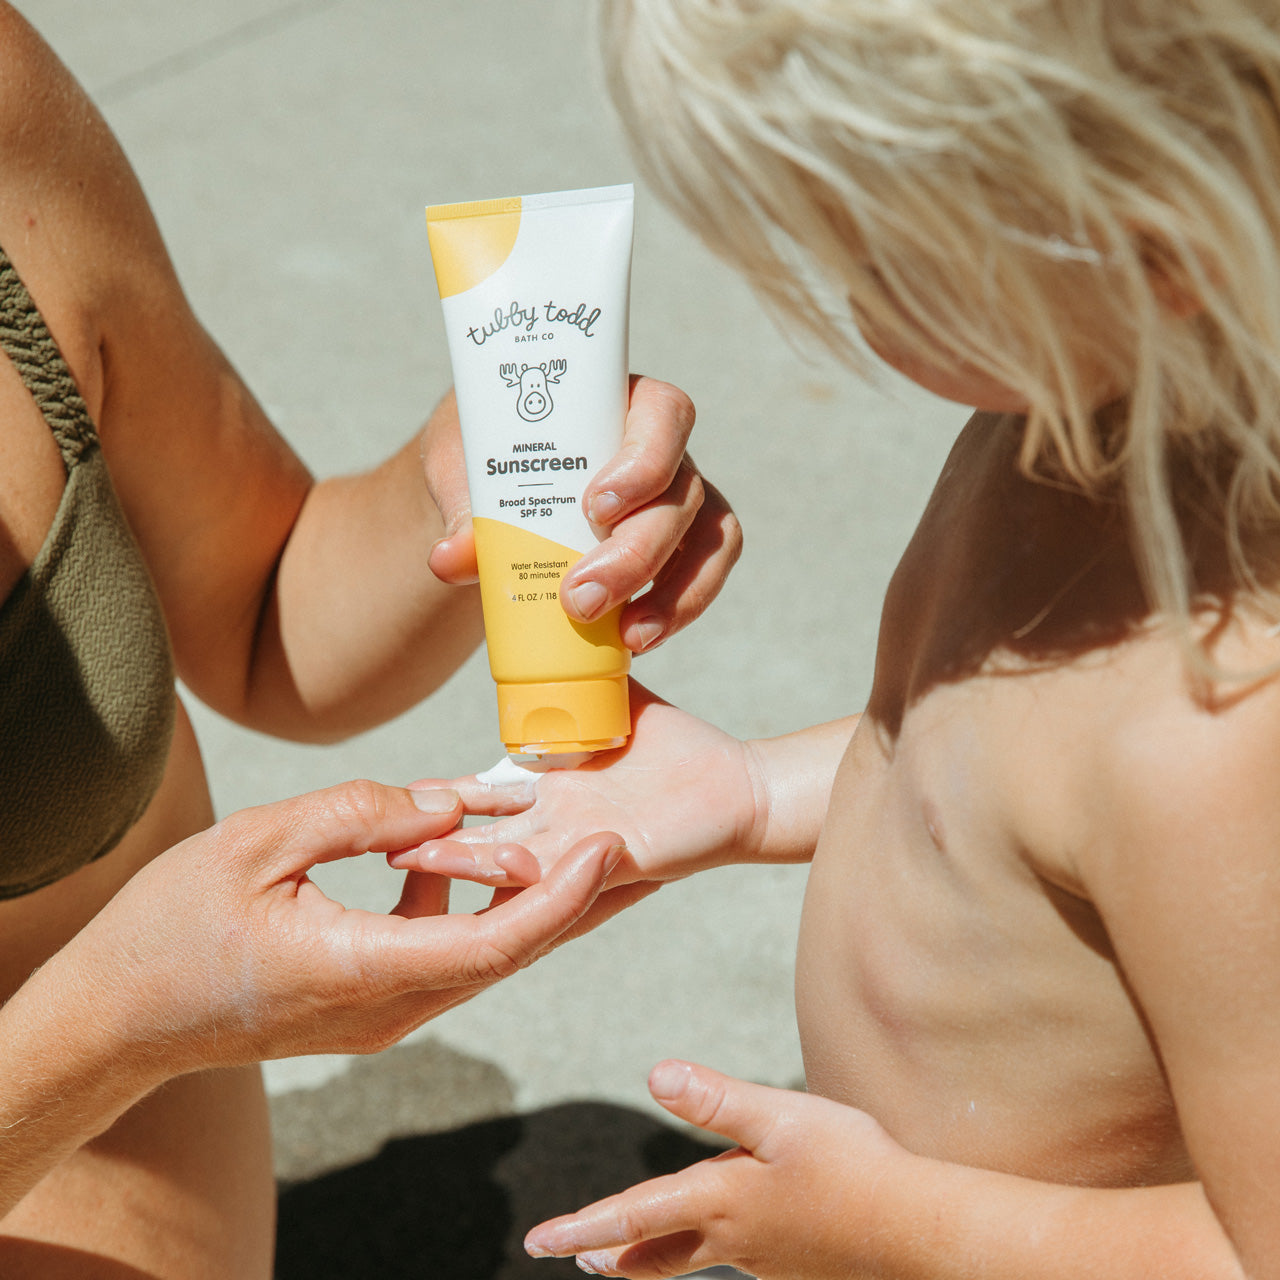 Mama applying Mineral Sunscreen to child's hand